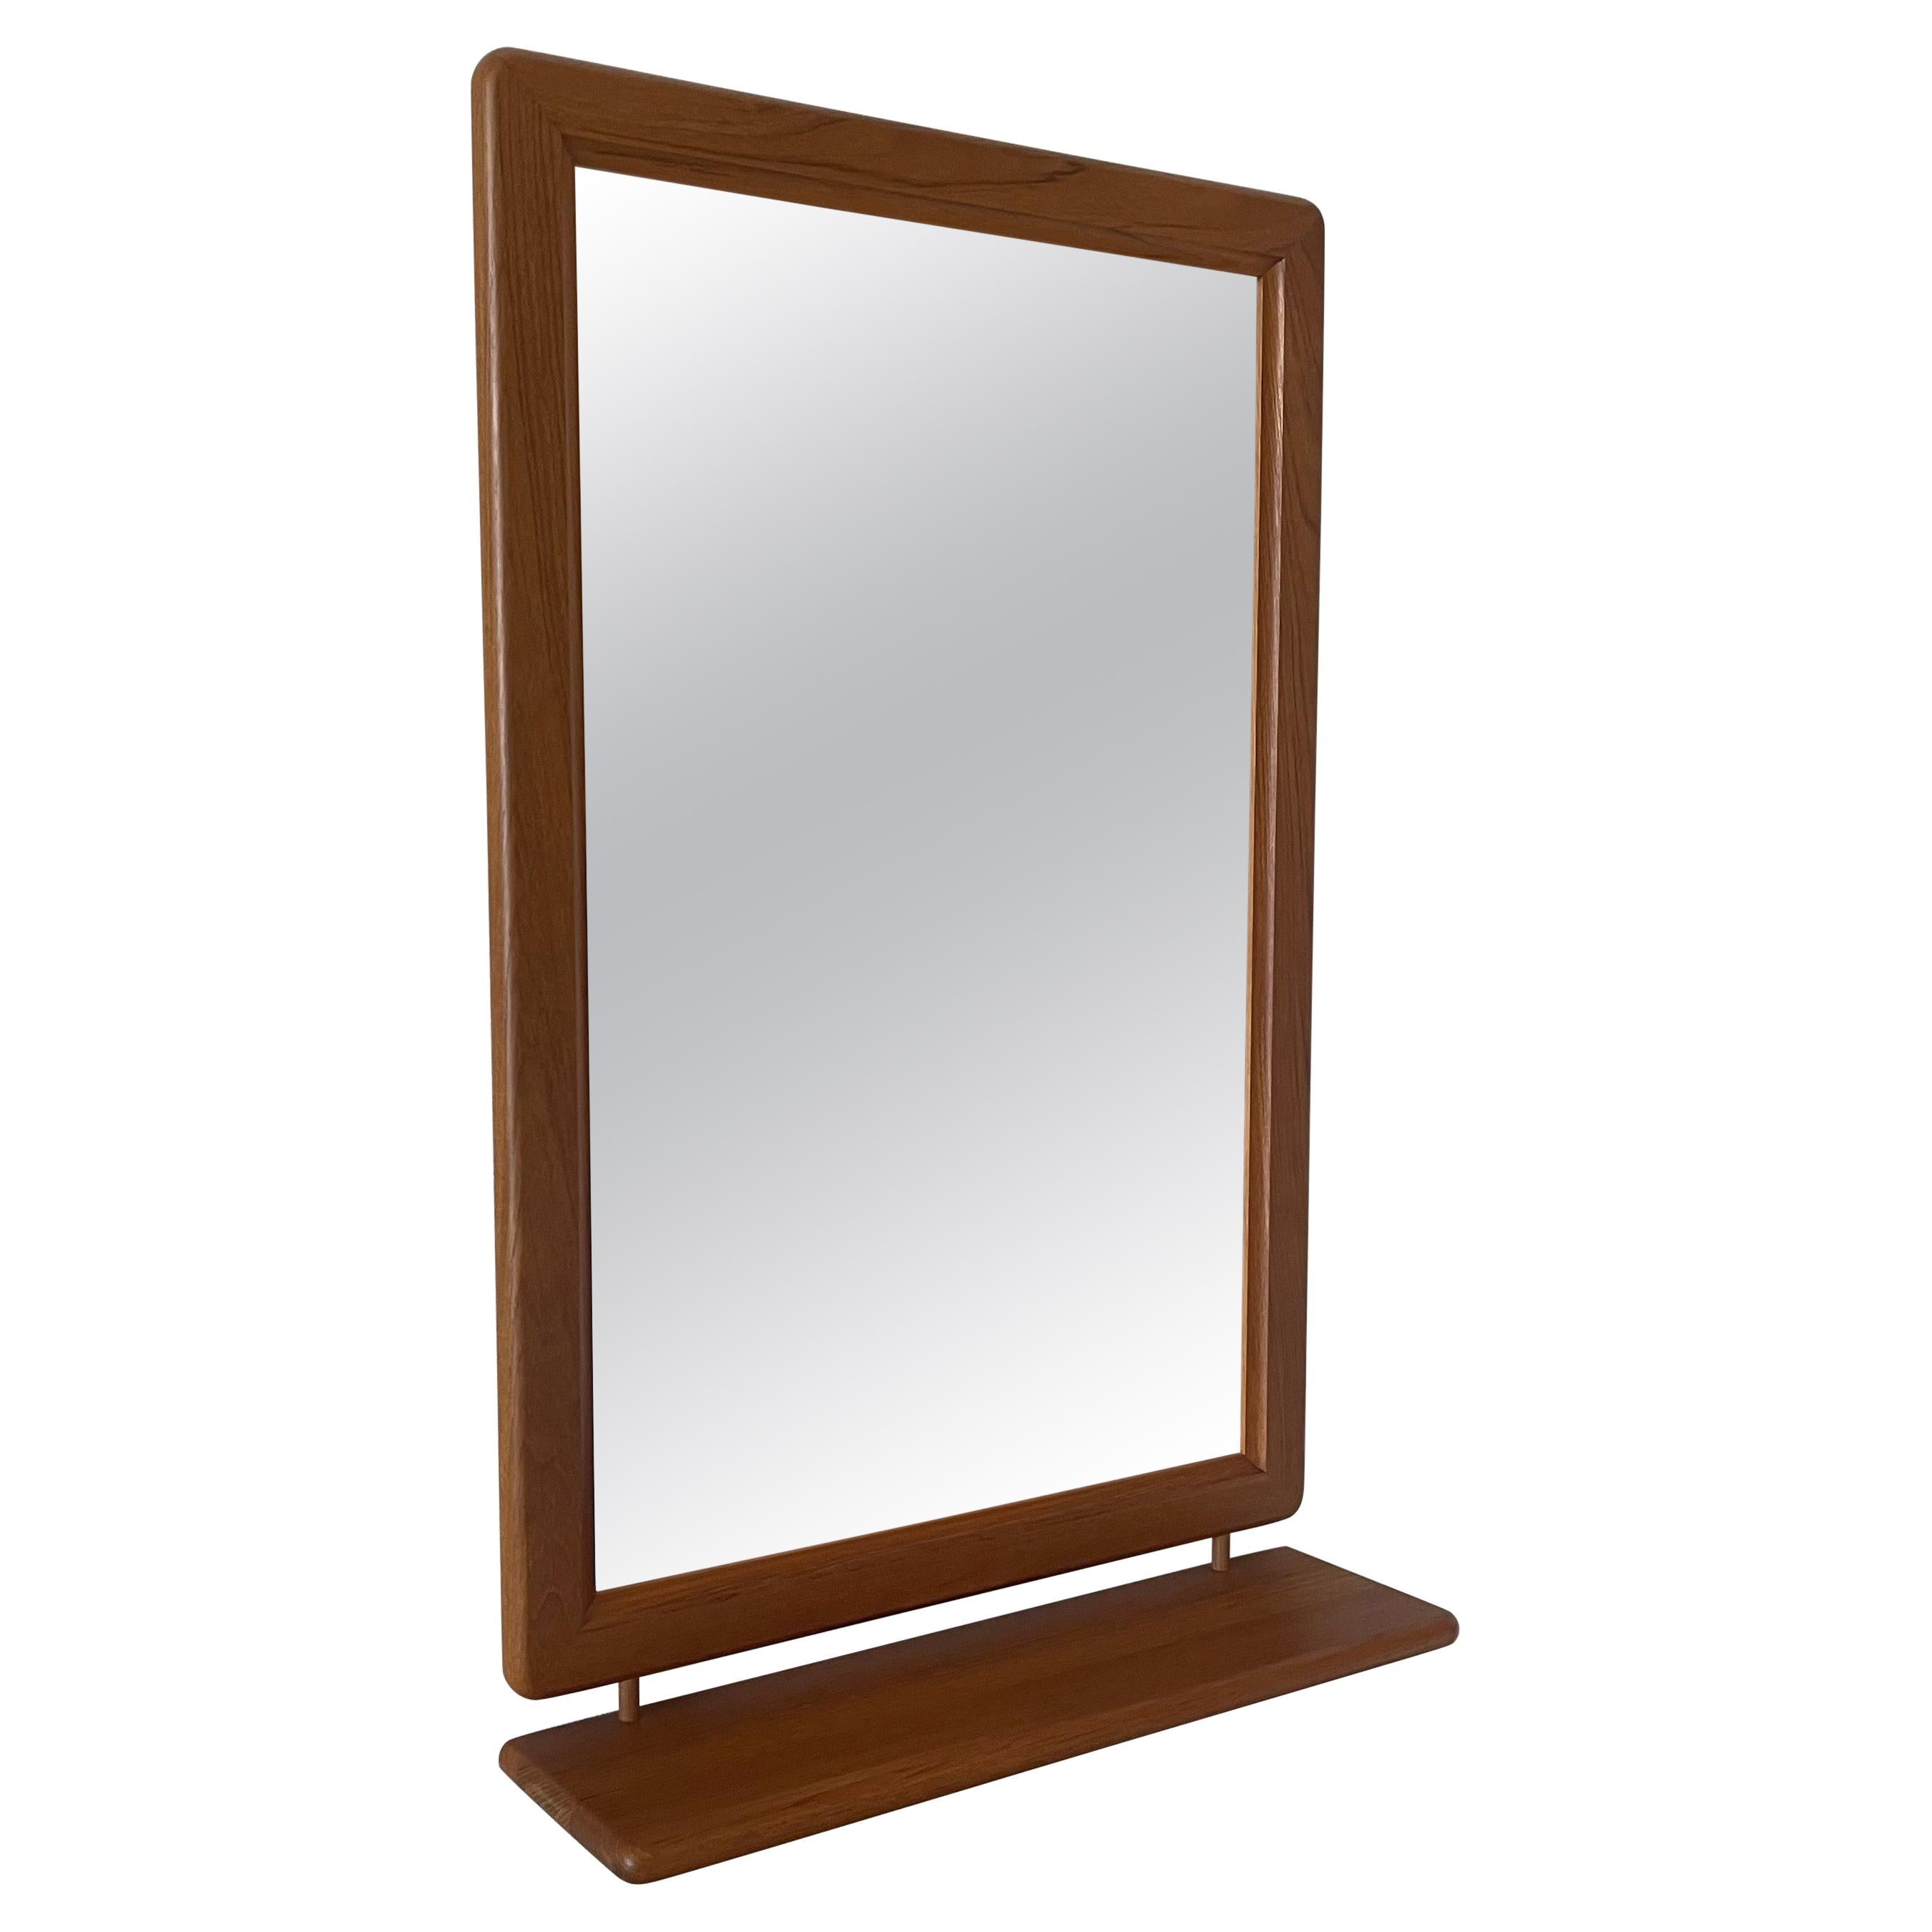 Danish Modern Solid Teak Mirror with Rounded Corners and Shelf For Sale